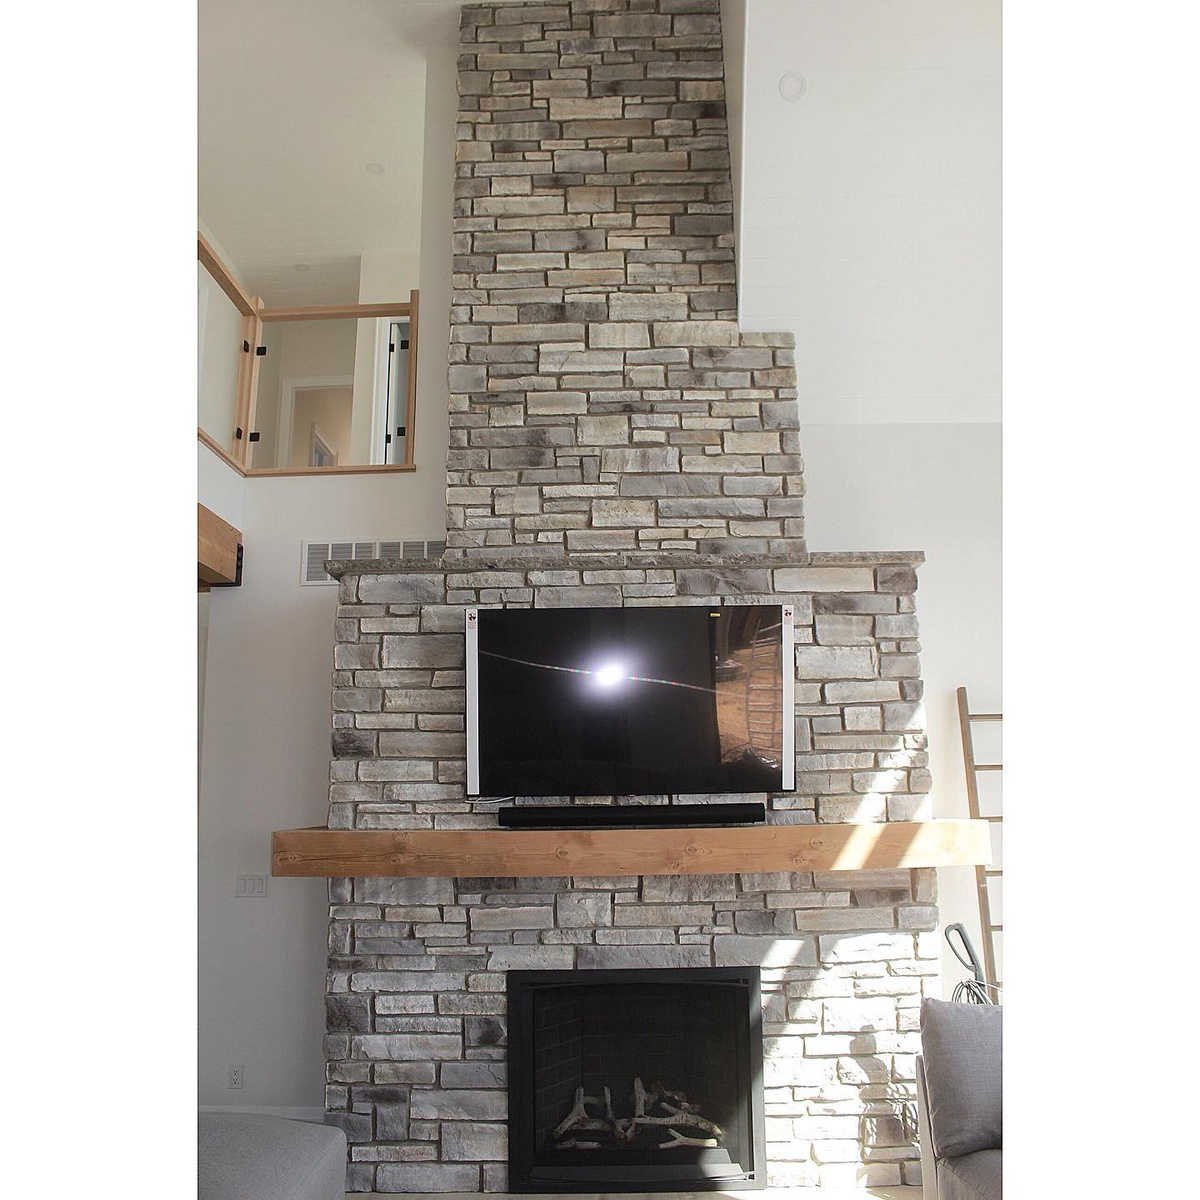 What Are the Tips To Install High-Efficiency Fireplaces?